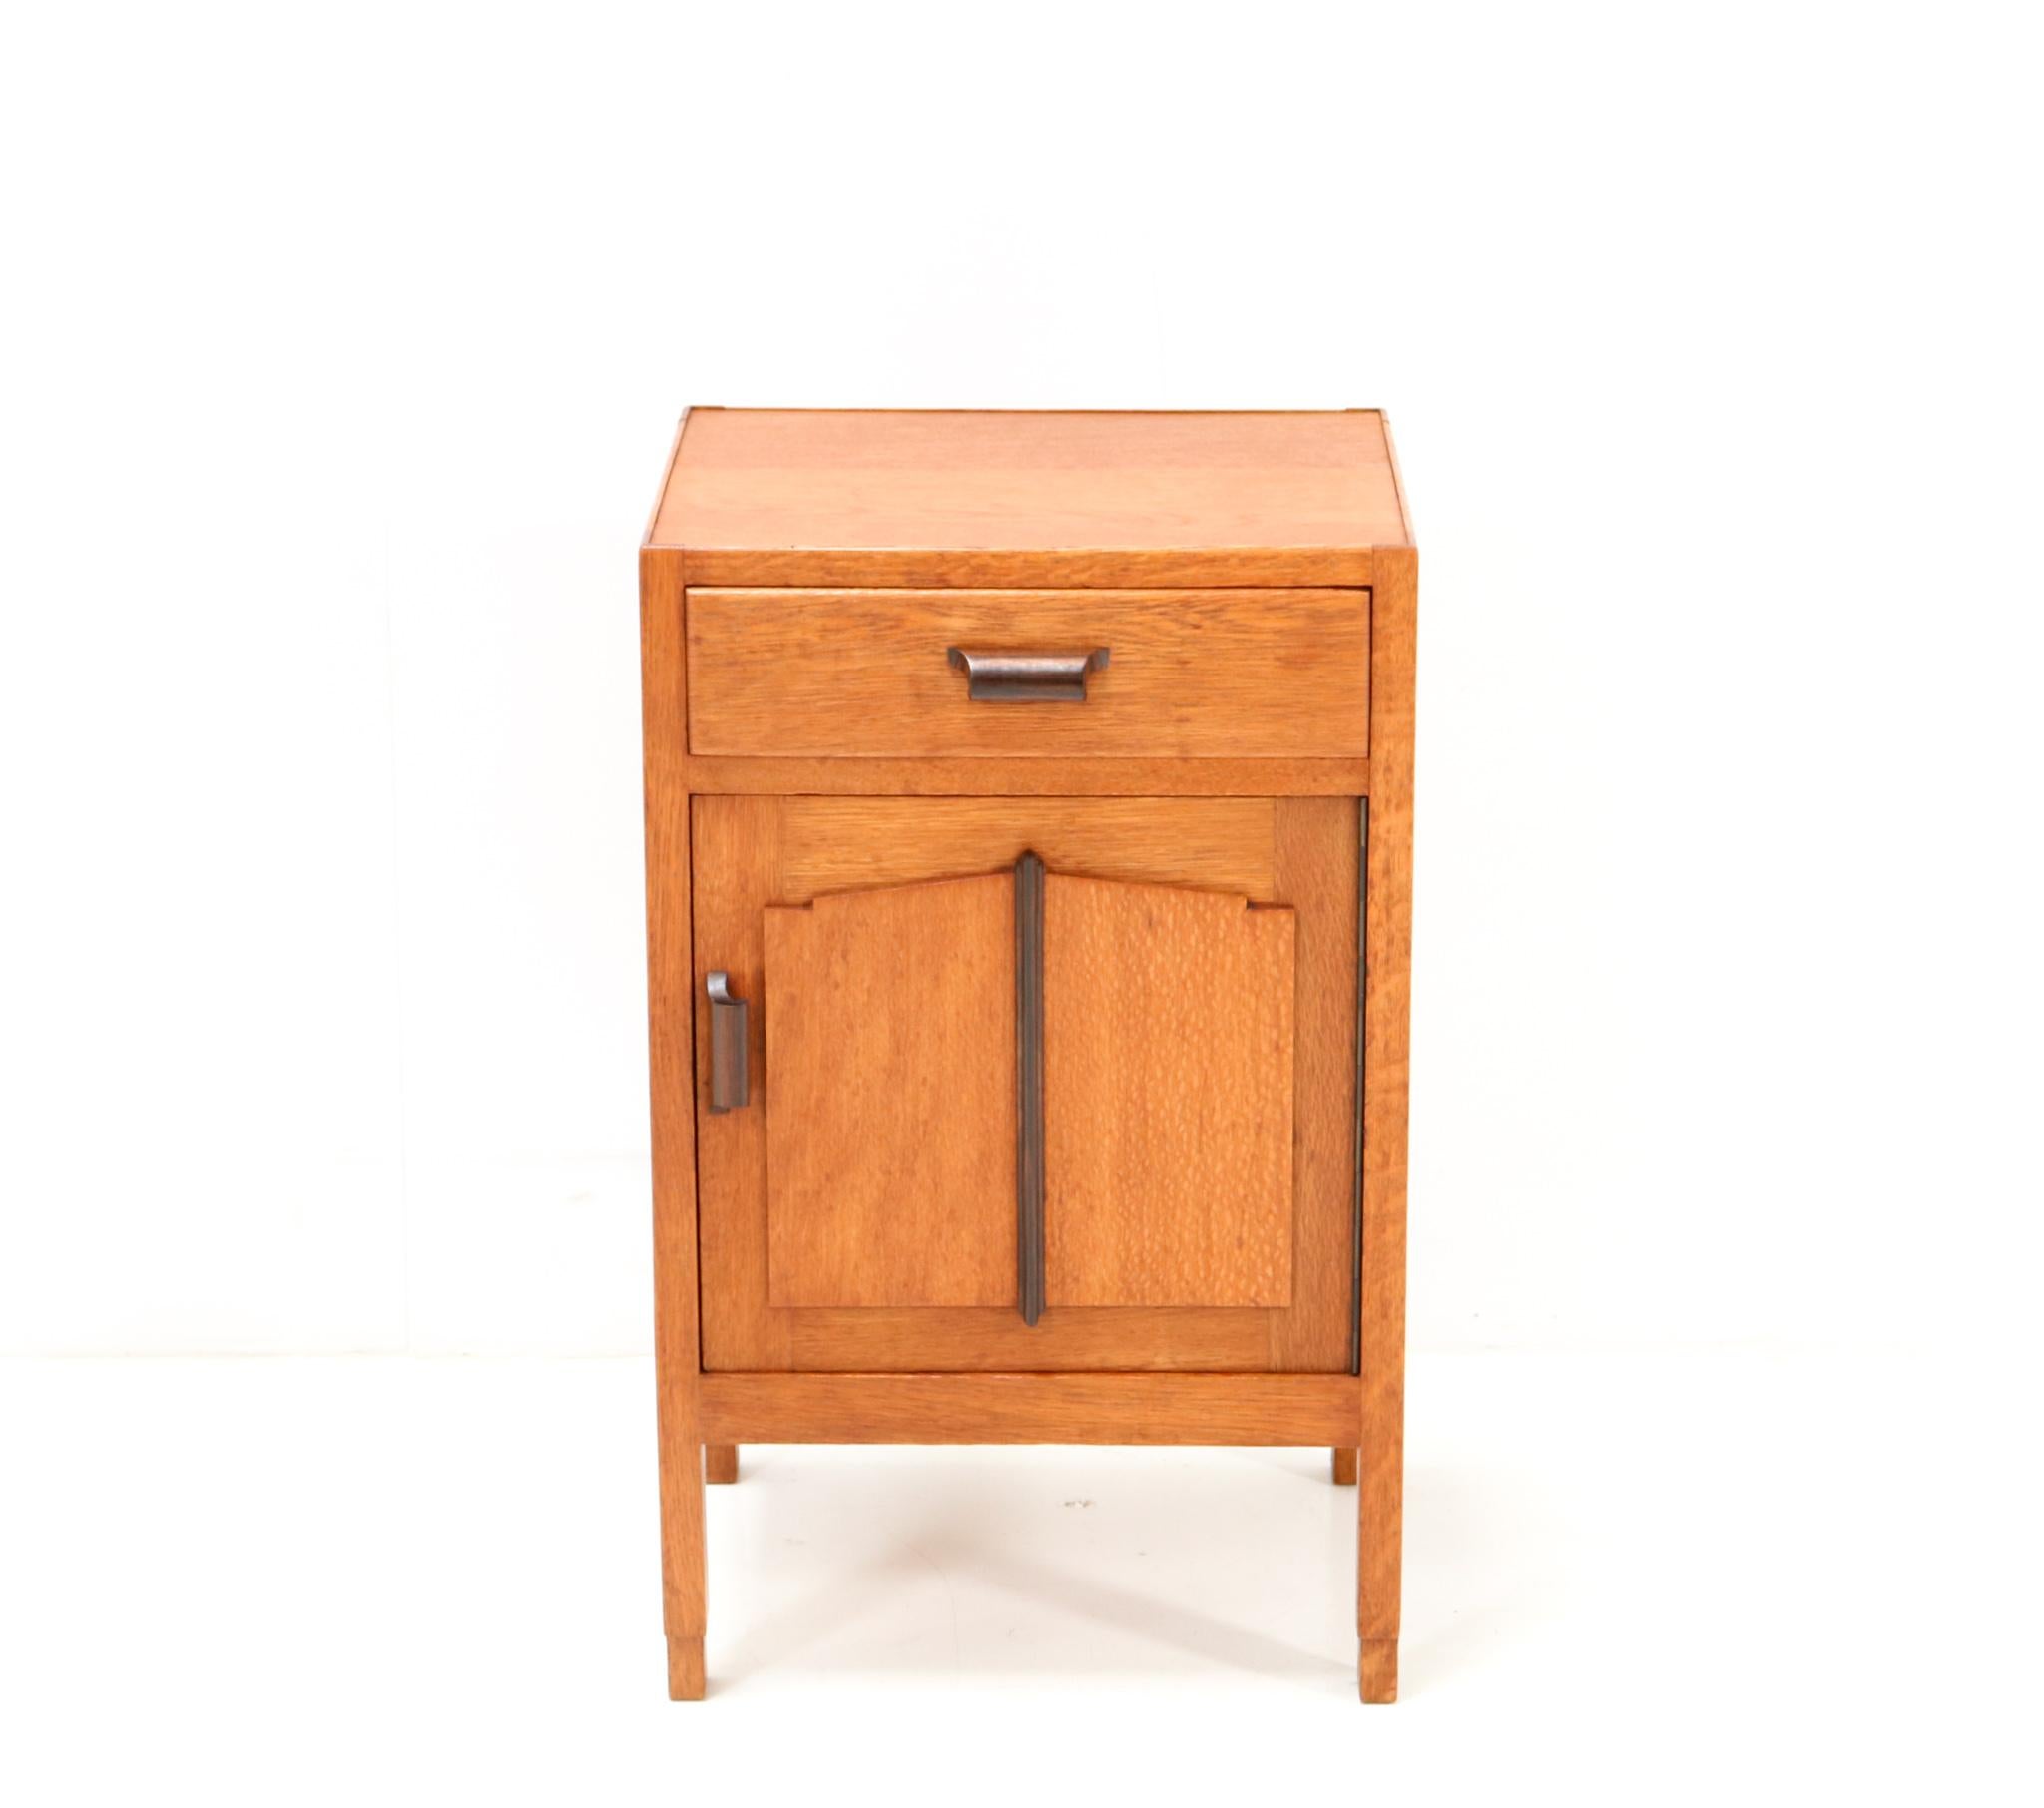 Stunning Art Deco Amsterdamse School nightstand or bedside table.
Striking Dutch design from the 1920s.
Solid oak with original solid macassar ebony handles on drawer and door.
The door has also a solid macassar ebony element in the middle of the